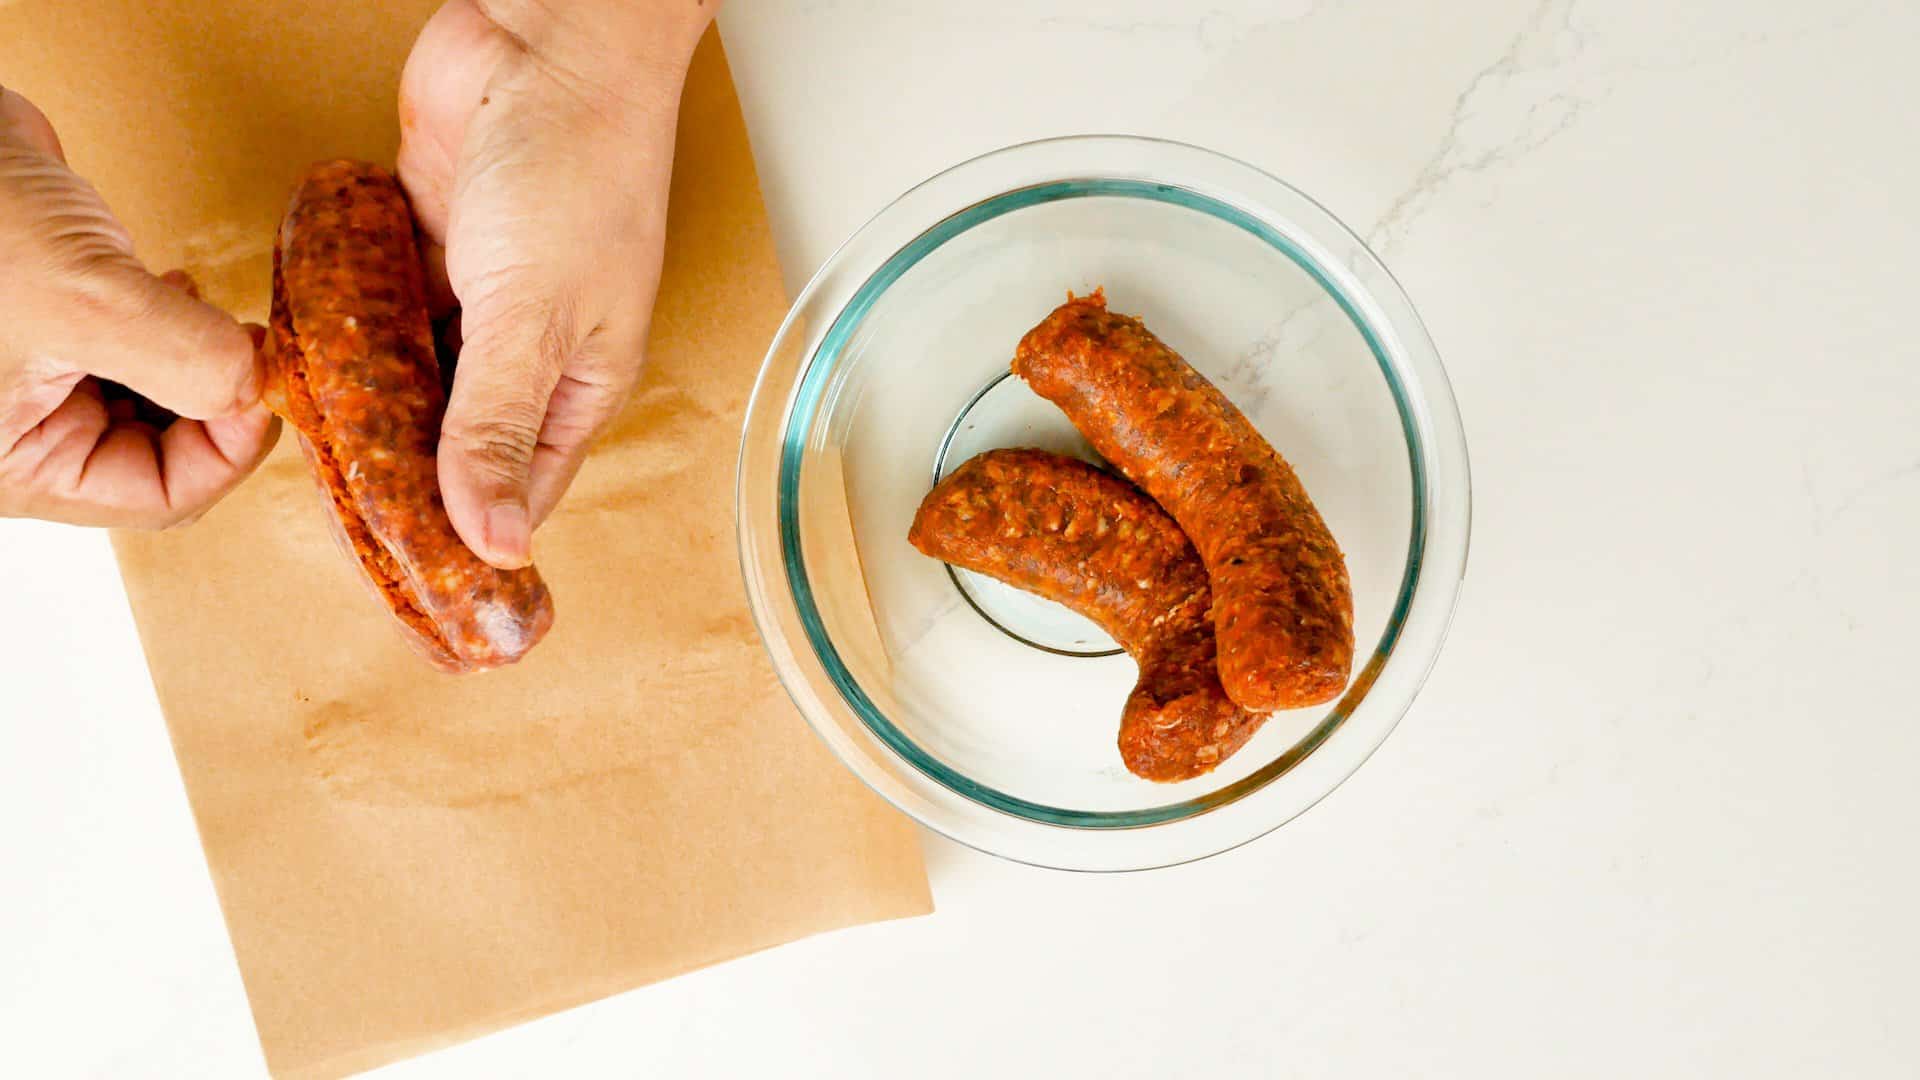 Removing casing from chorizo sausage.